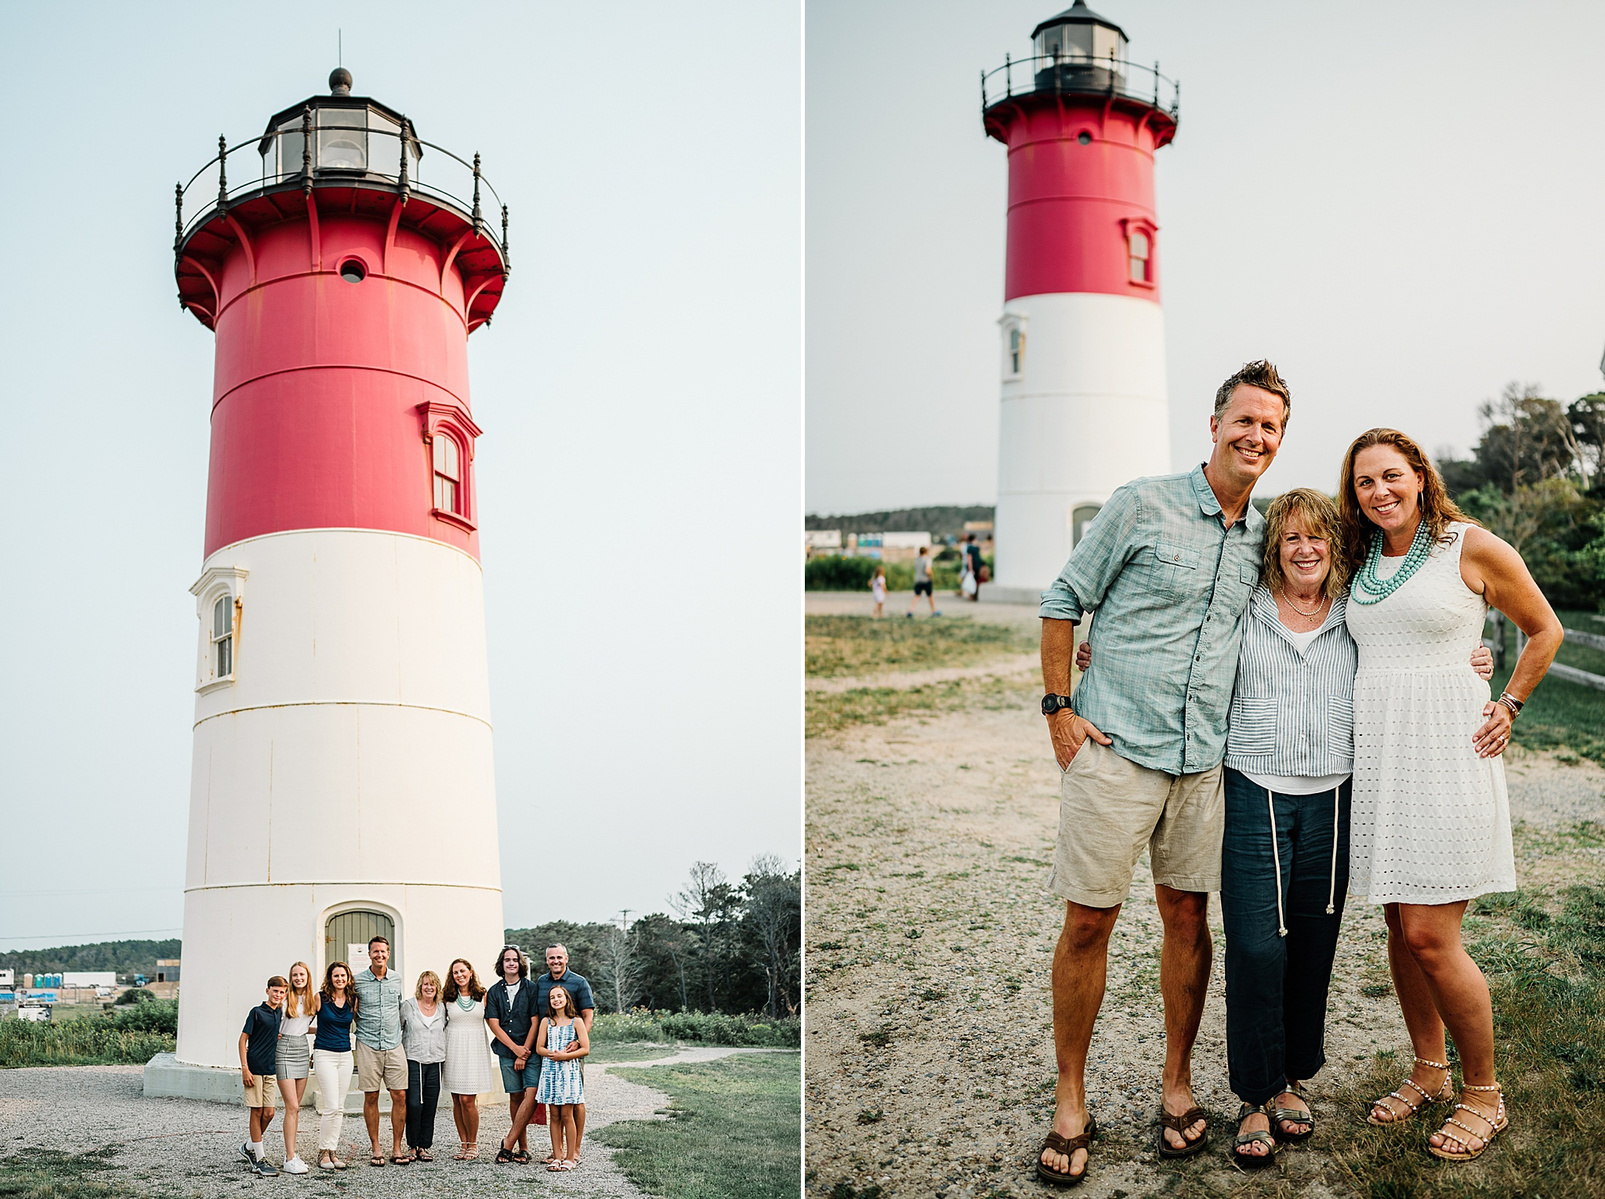 An extended family photo session at Nauset Lighthouse in Eastham on Cape Cod